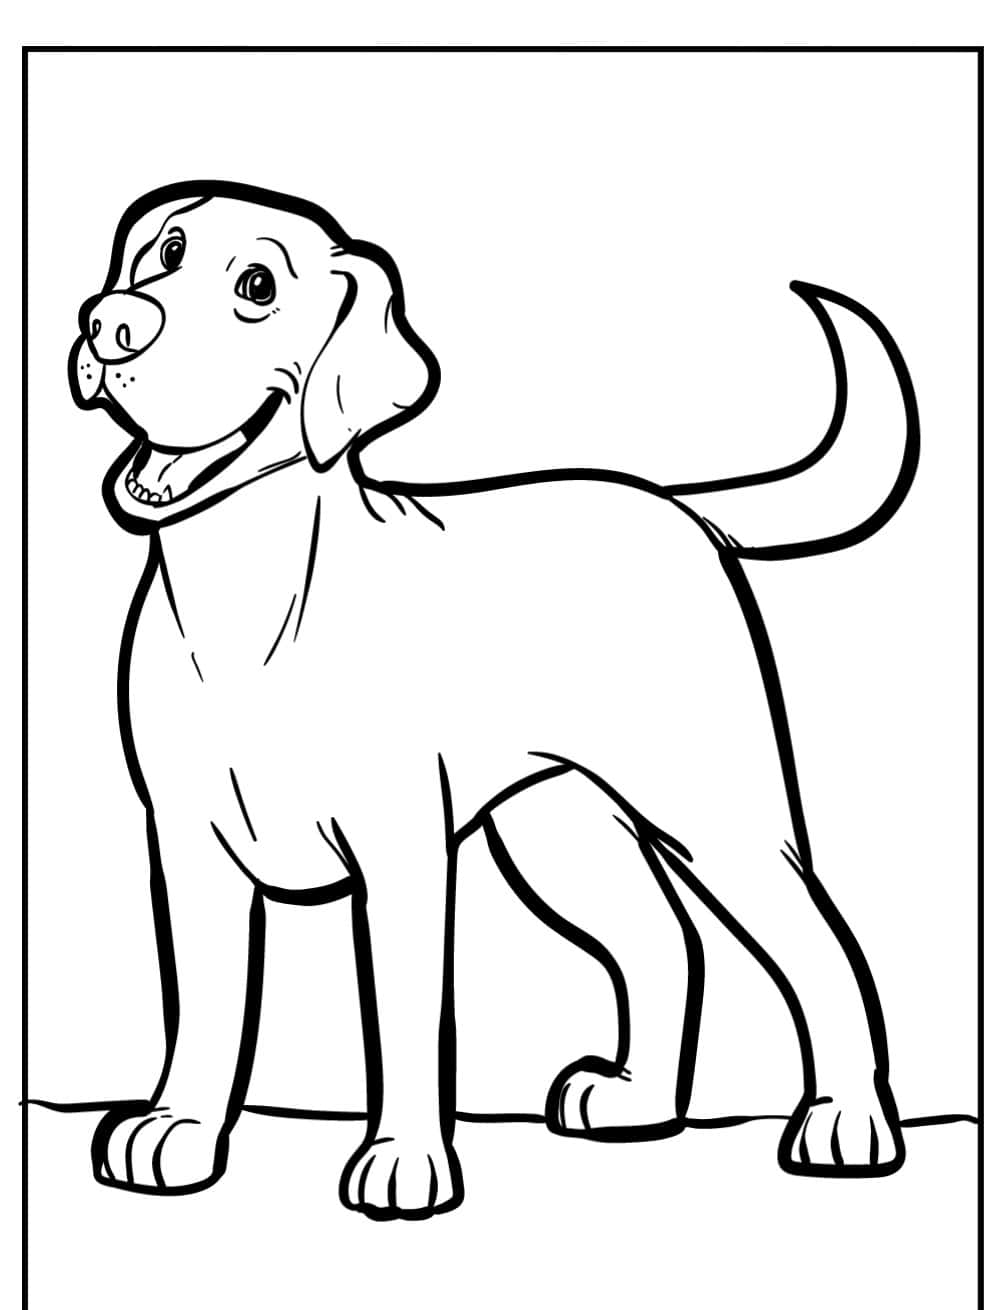 Labrador Dog Coloring Page Picture